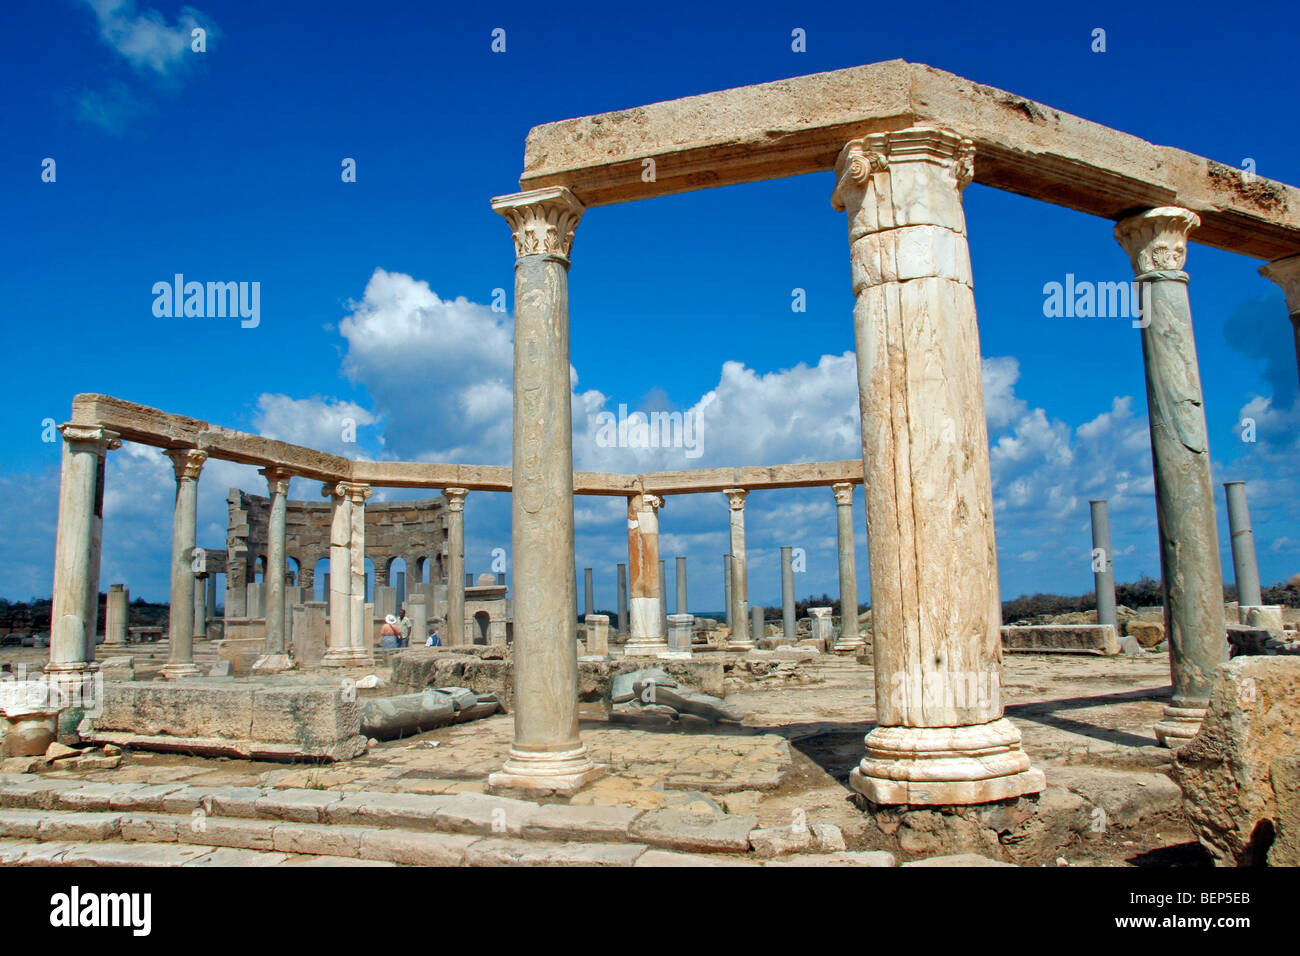 Ruins of Roman market place at Leptis Magna / Lectis Magna / Lepcis Magna in Khoms / Al Khums near Tripoli, Libya, North Africa Stock Photo